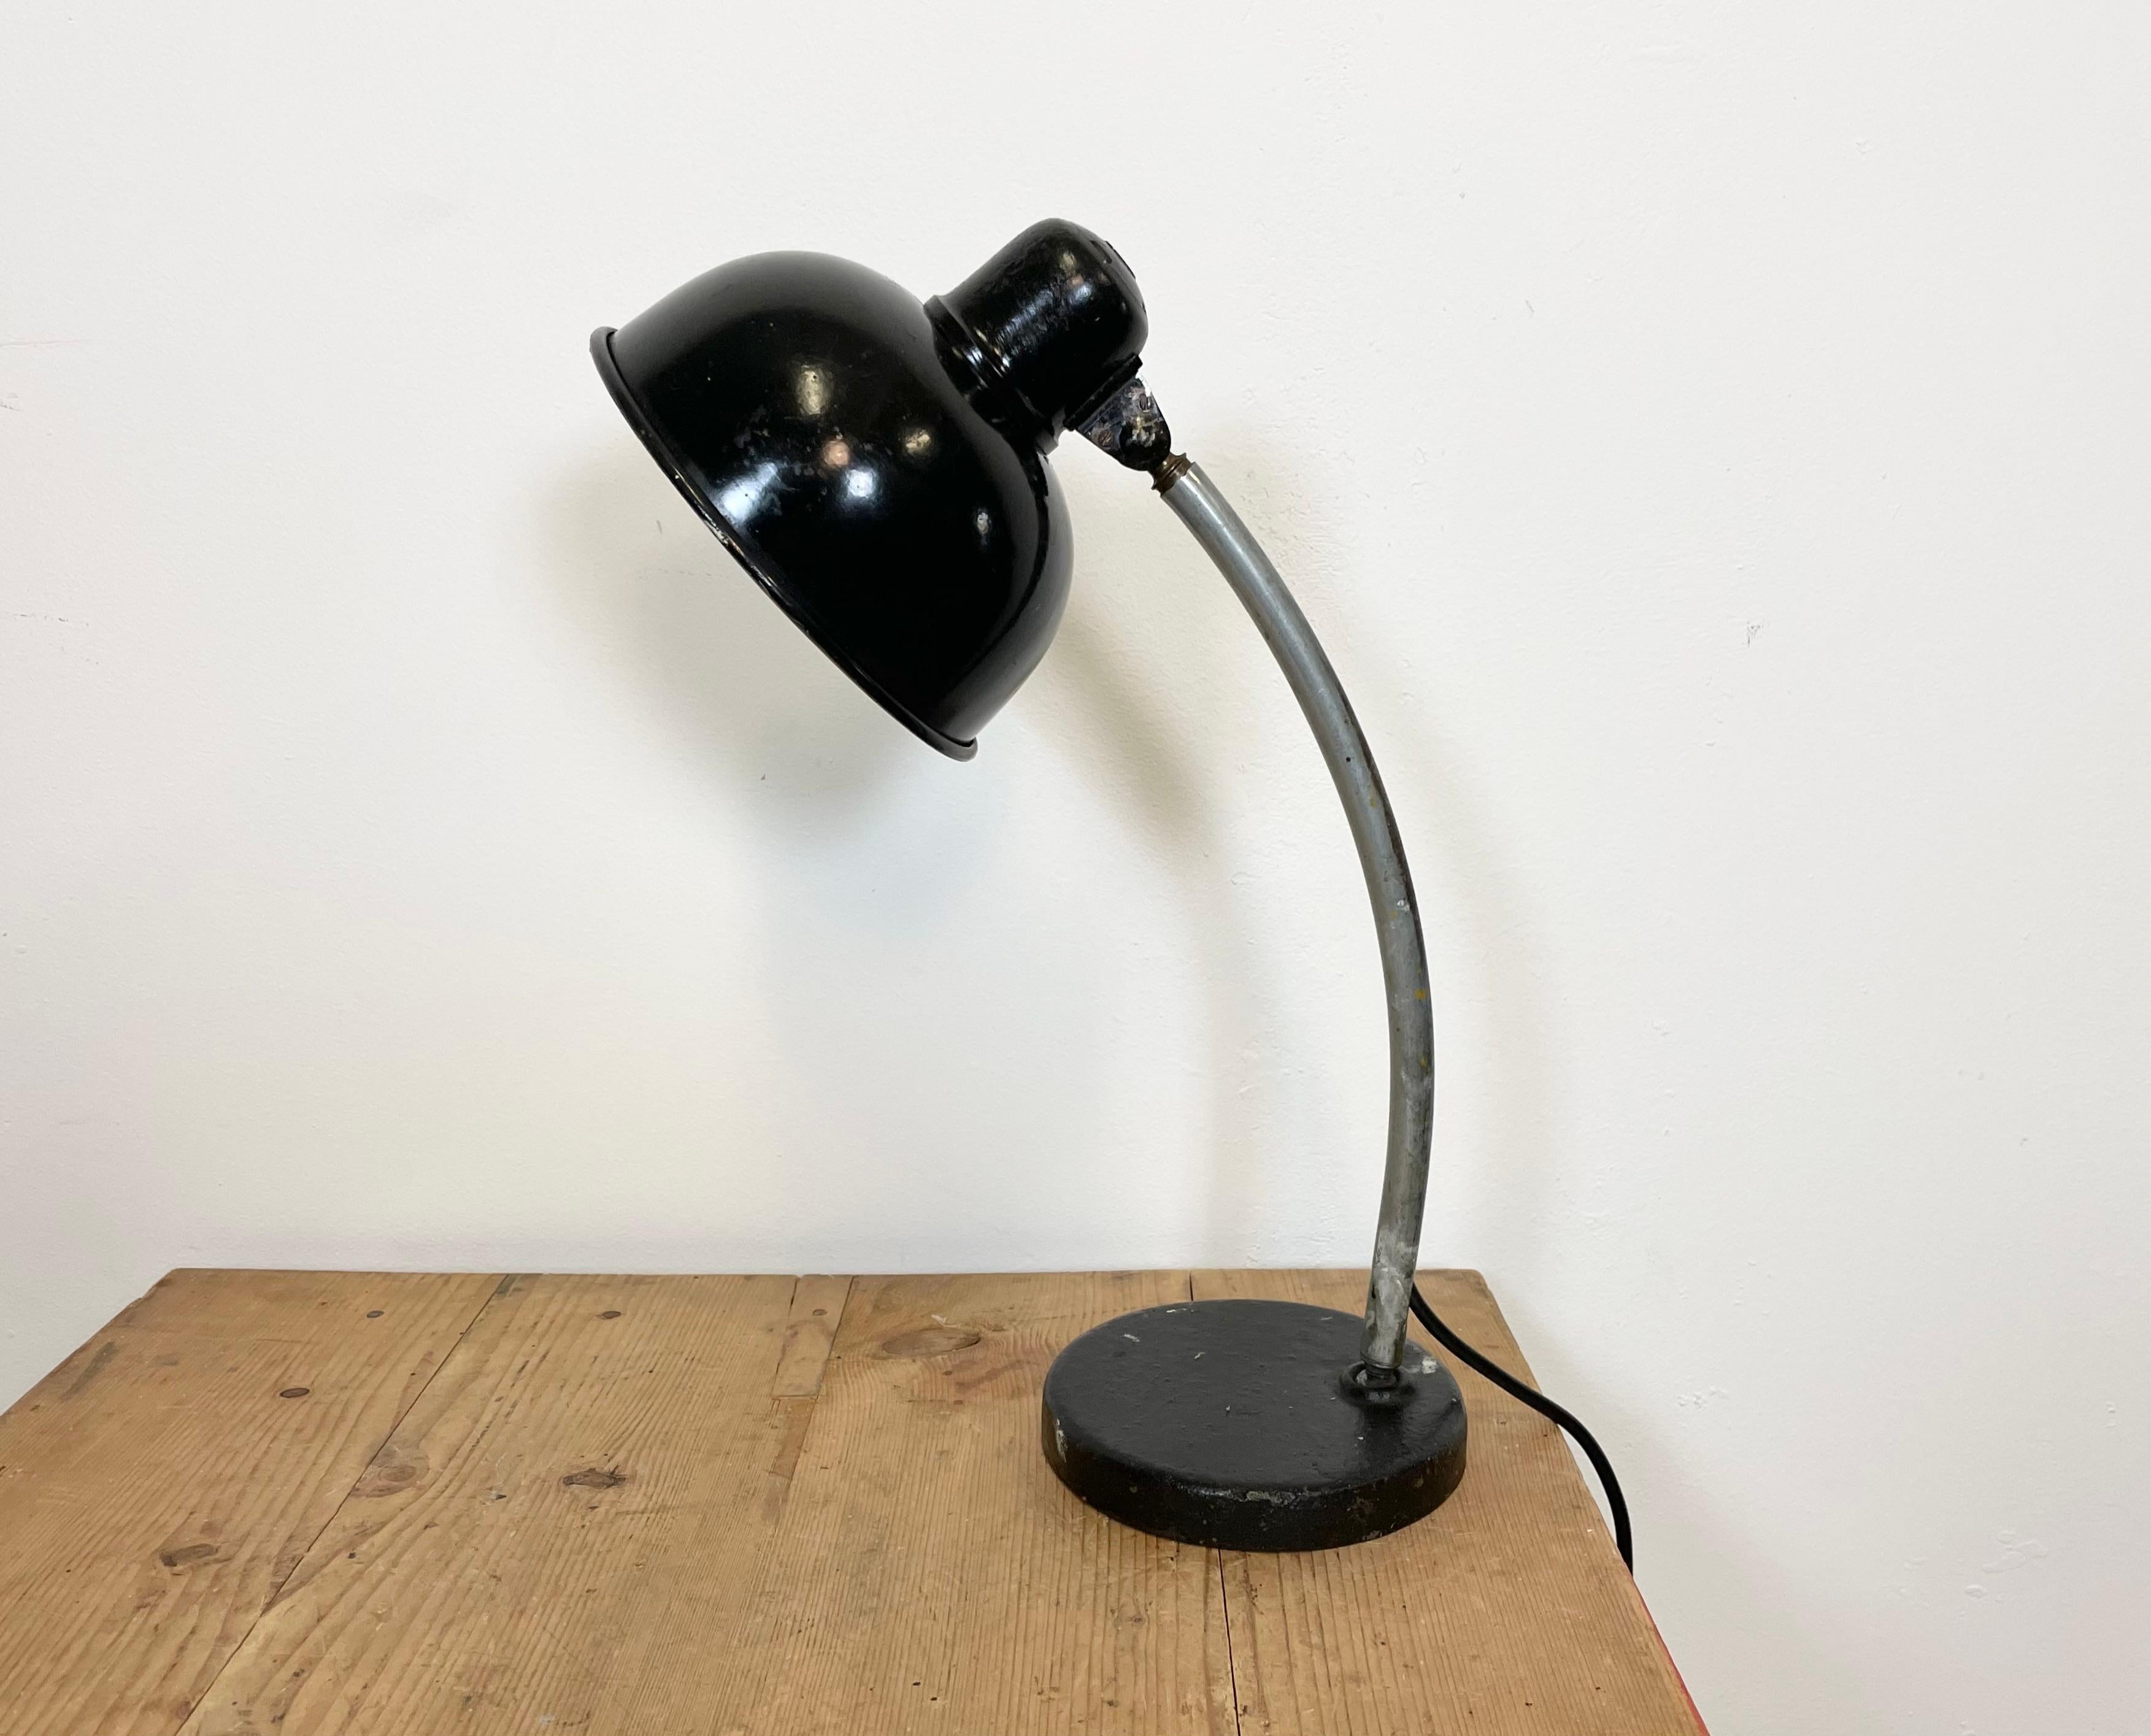 Vintage industrial workshop table lamp with two adjustable joints made in former Czechoslovakia during the 1950s It features an aluminium shade with bakelite top aand a metal arm and base. The original socket requires standard E27/E26 lightbulbs.